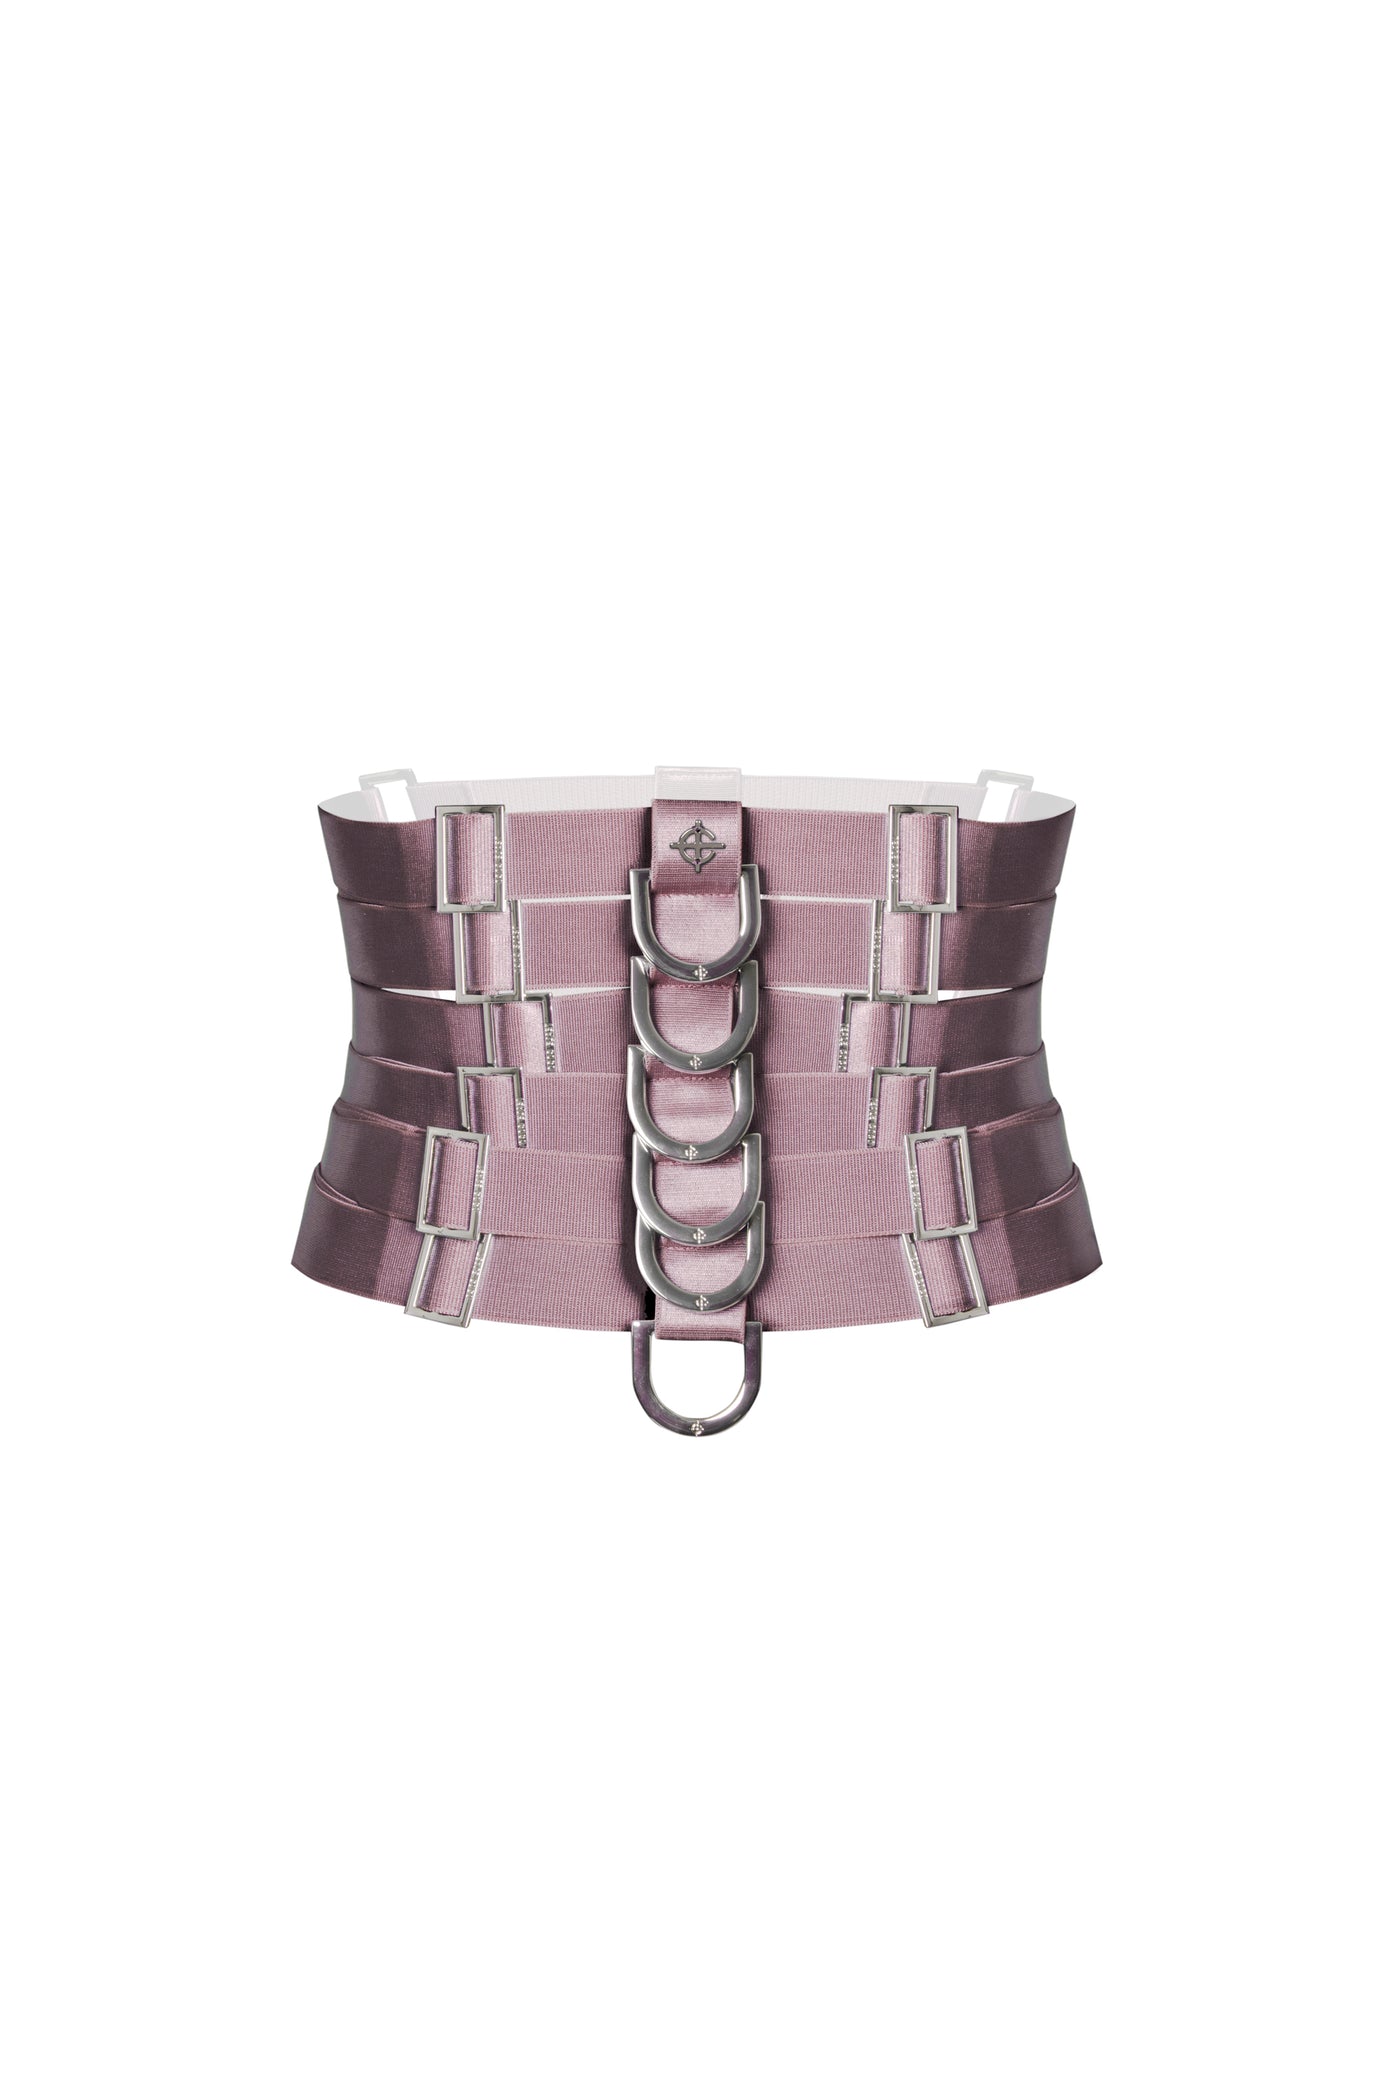 D Ring Corset - Dusted Pink